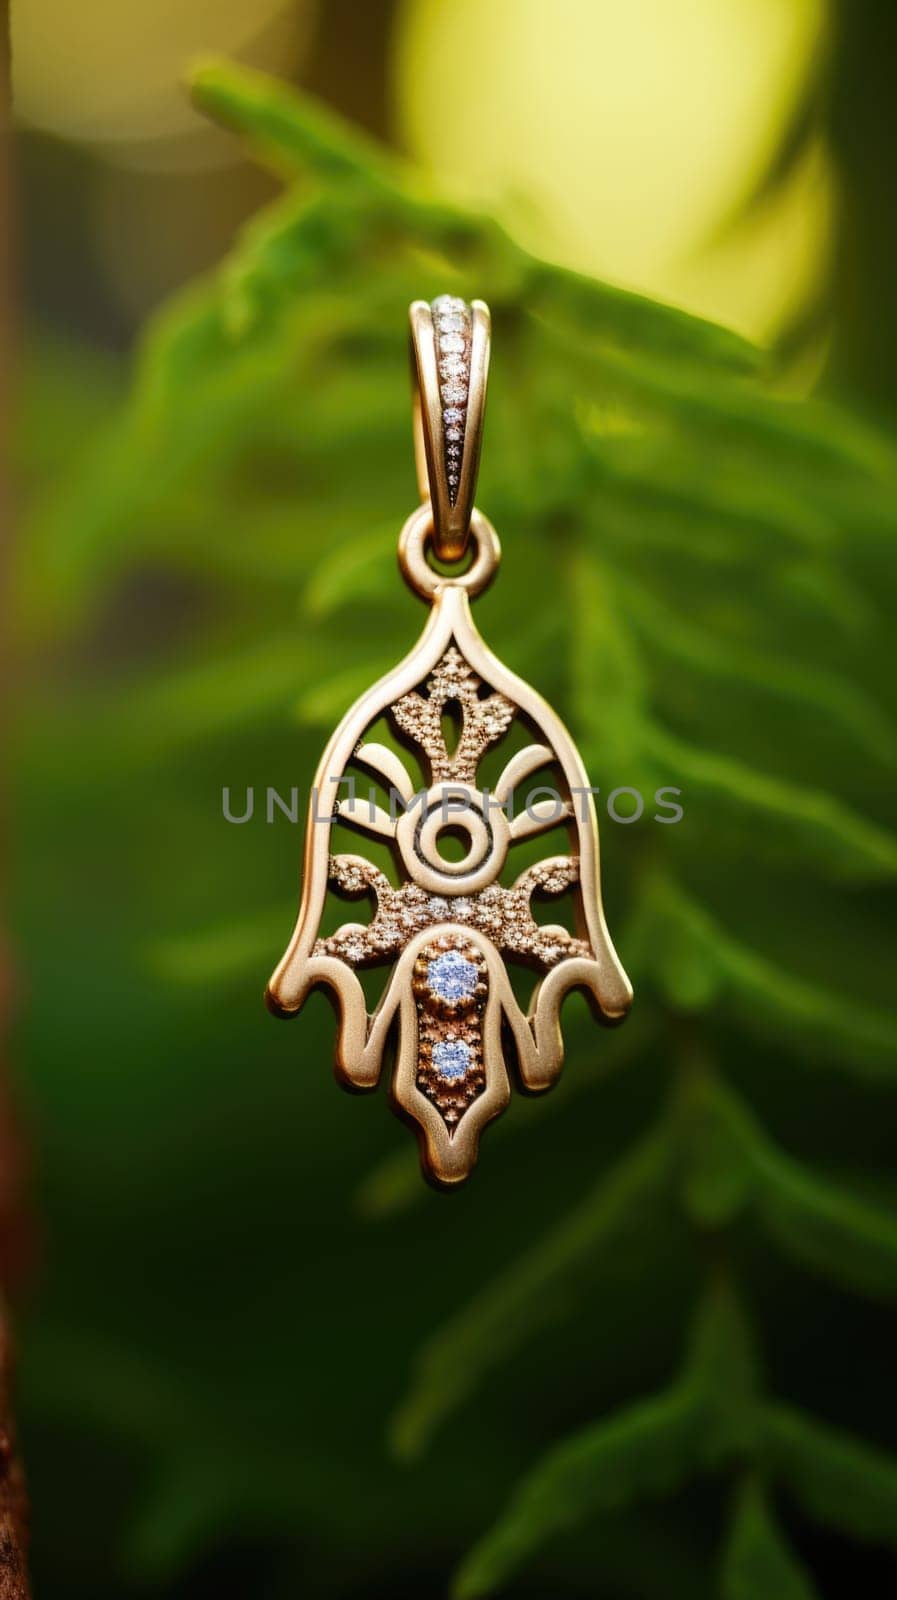 A gold hamsa pendant with a diamond in the center, AI by starush